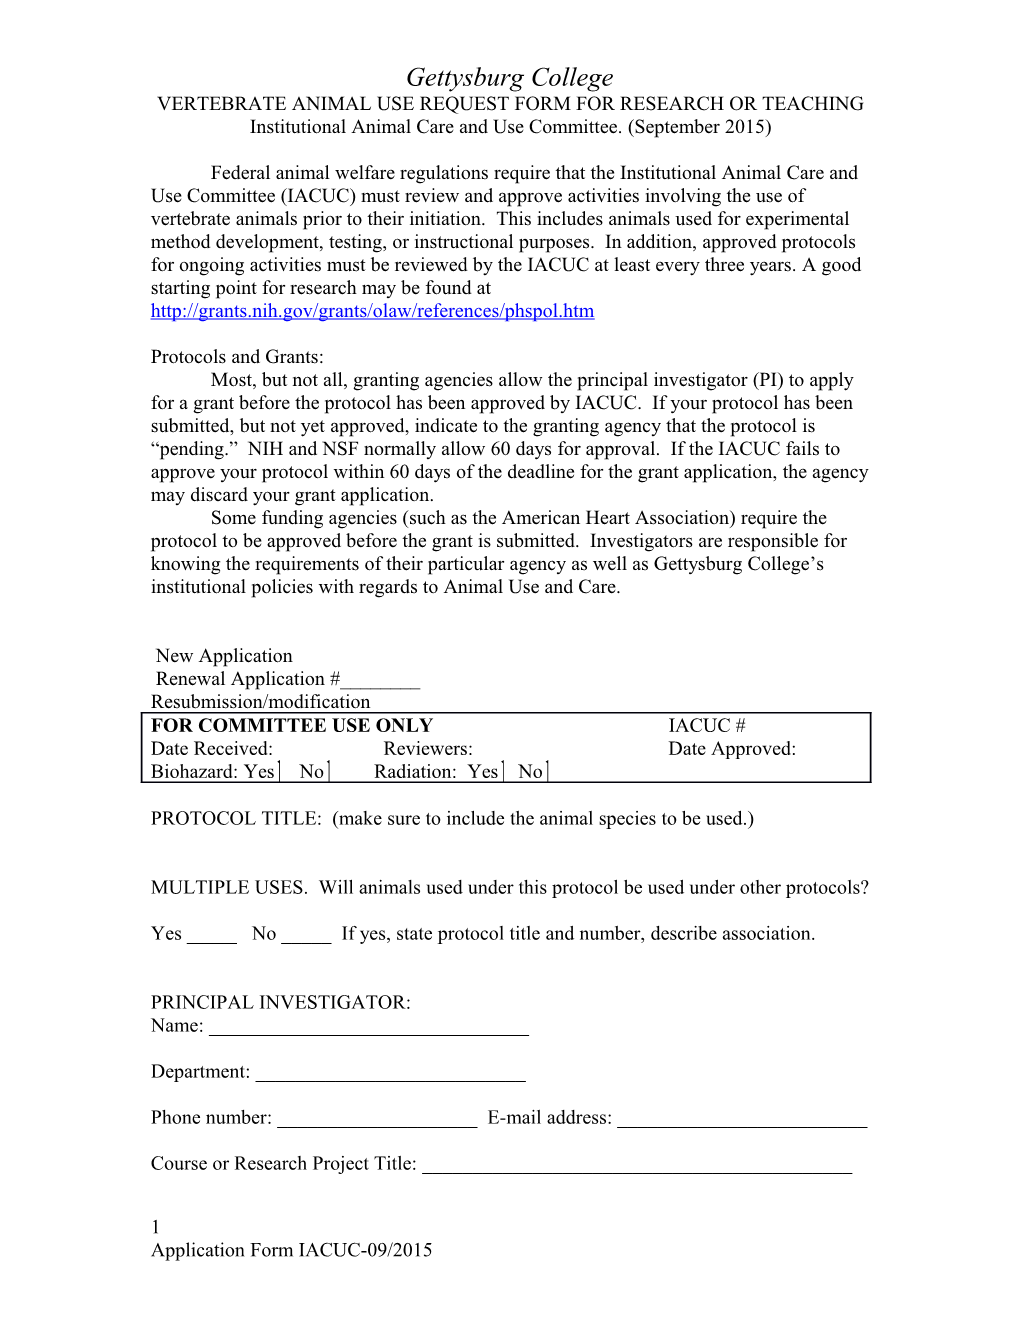 Vertebrate Animal Use Request Form for Research Or Teaching